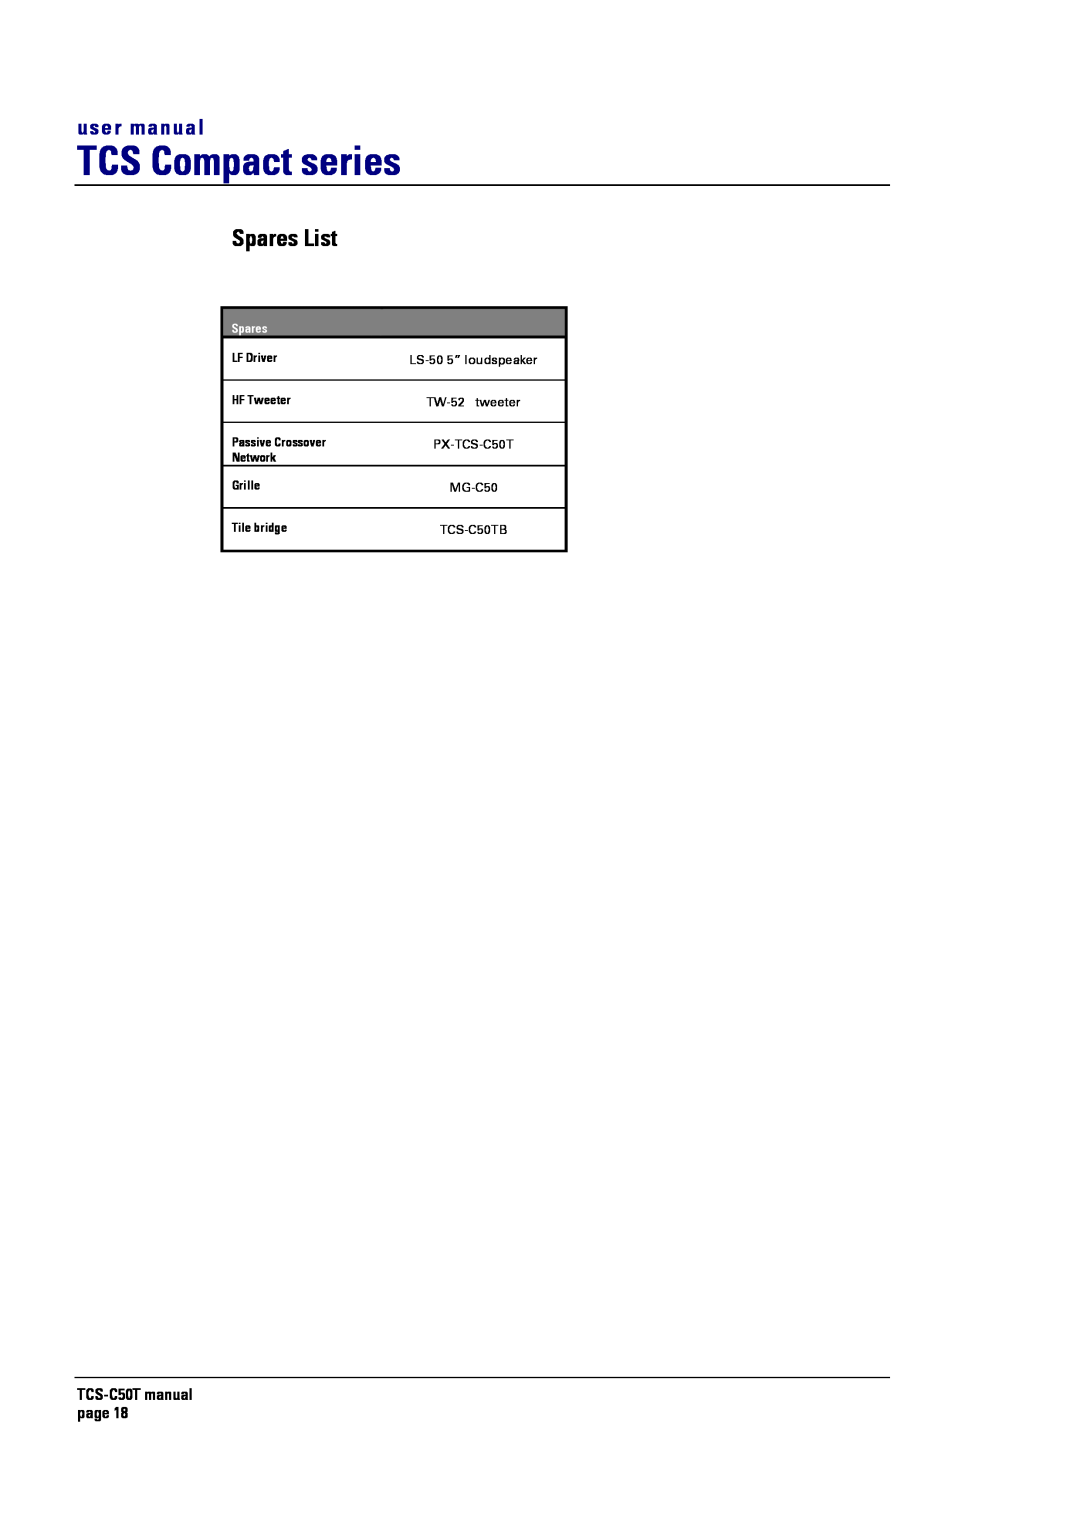 Turbosound user manual Spares List, TCS Compact series, TCS-C50Tmanual page 